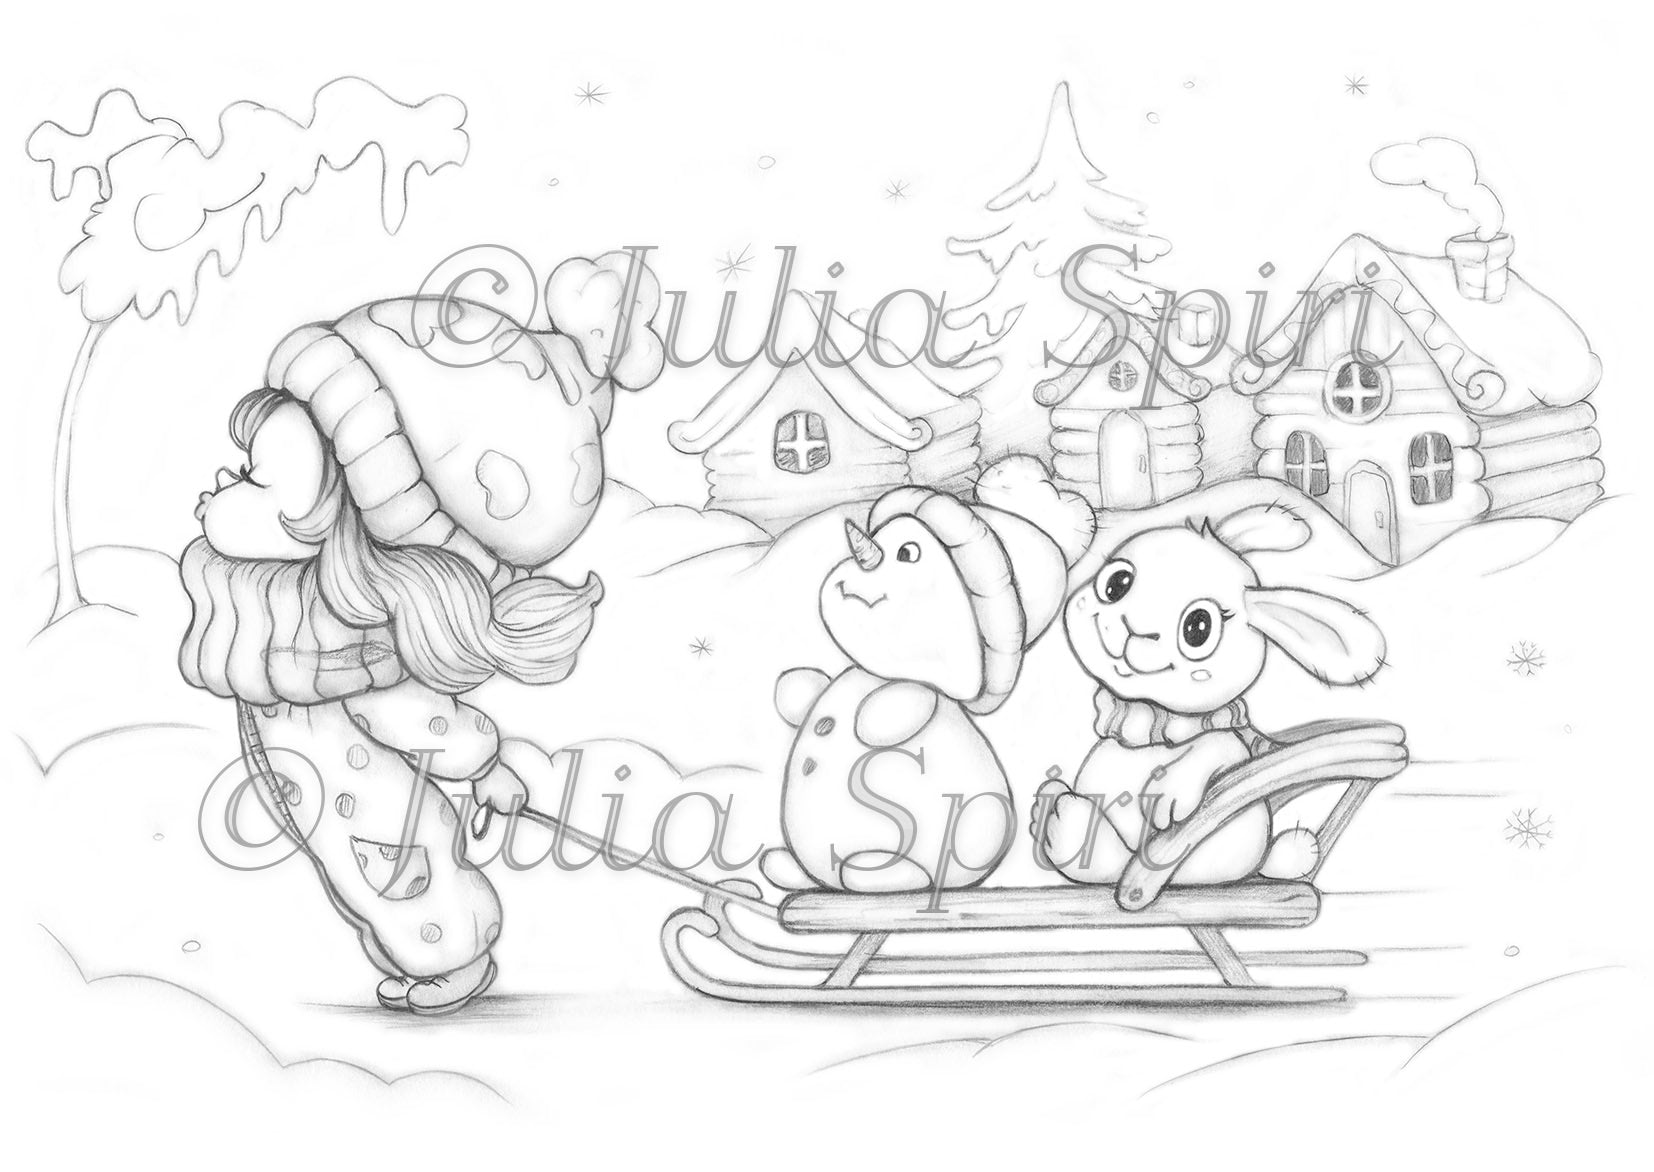 Coloring page girl with sled in snow winter sledding is fun â the art of julia spiri